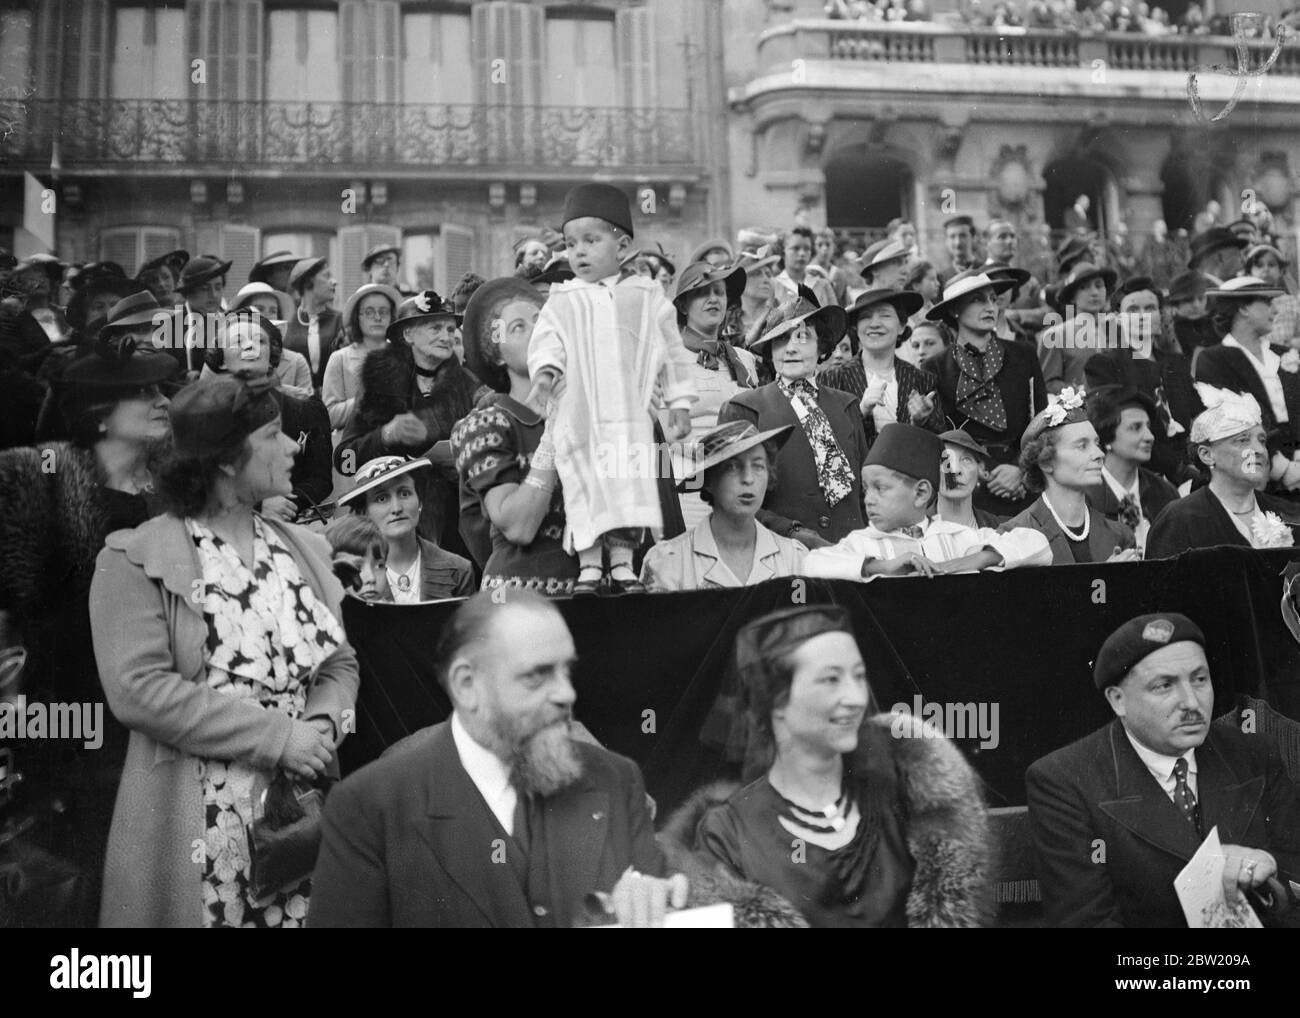 Commemorating the 148th anniversary of the fall of Bastille in the French revolution a million workers passed through Paris in the July demonstration. President Lebrun, King Carol of Romania and Sultan Sidi of Moroco watched the parade near the Arc de Triomphe. 14 July 1937. Stock Photo